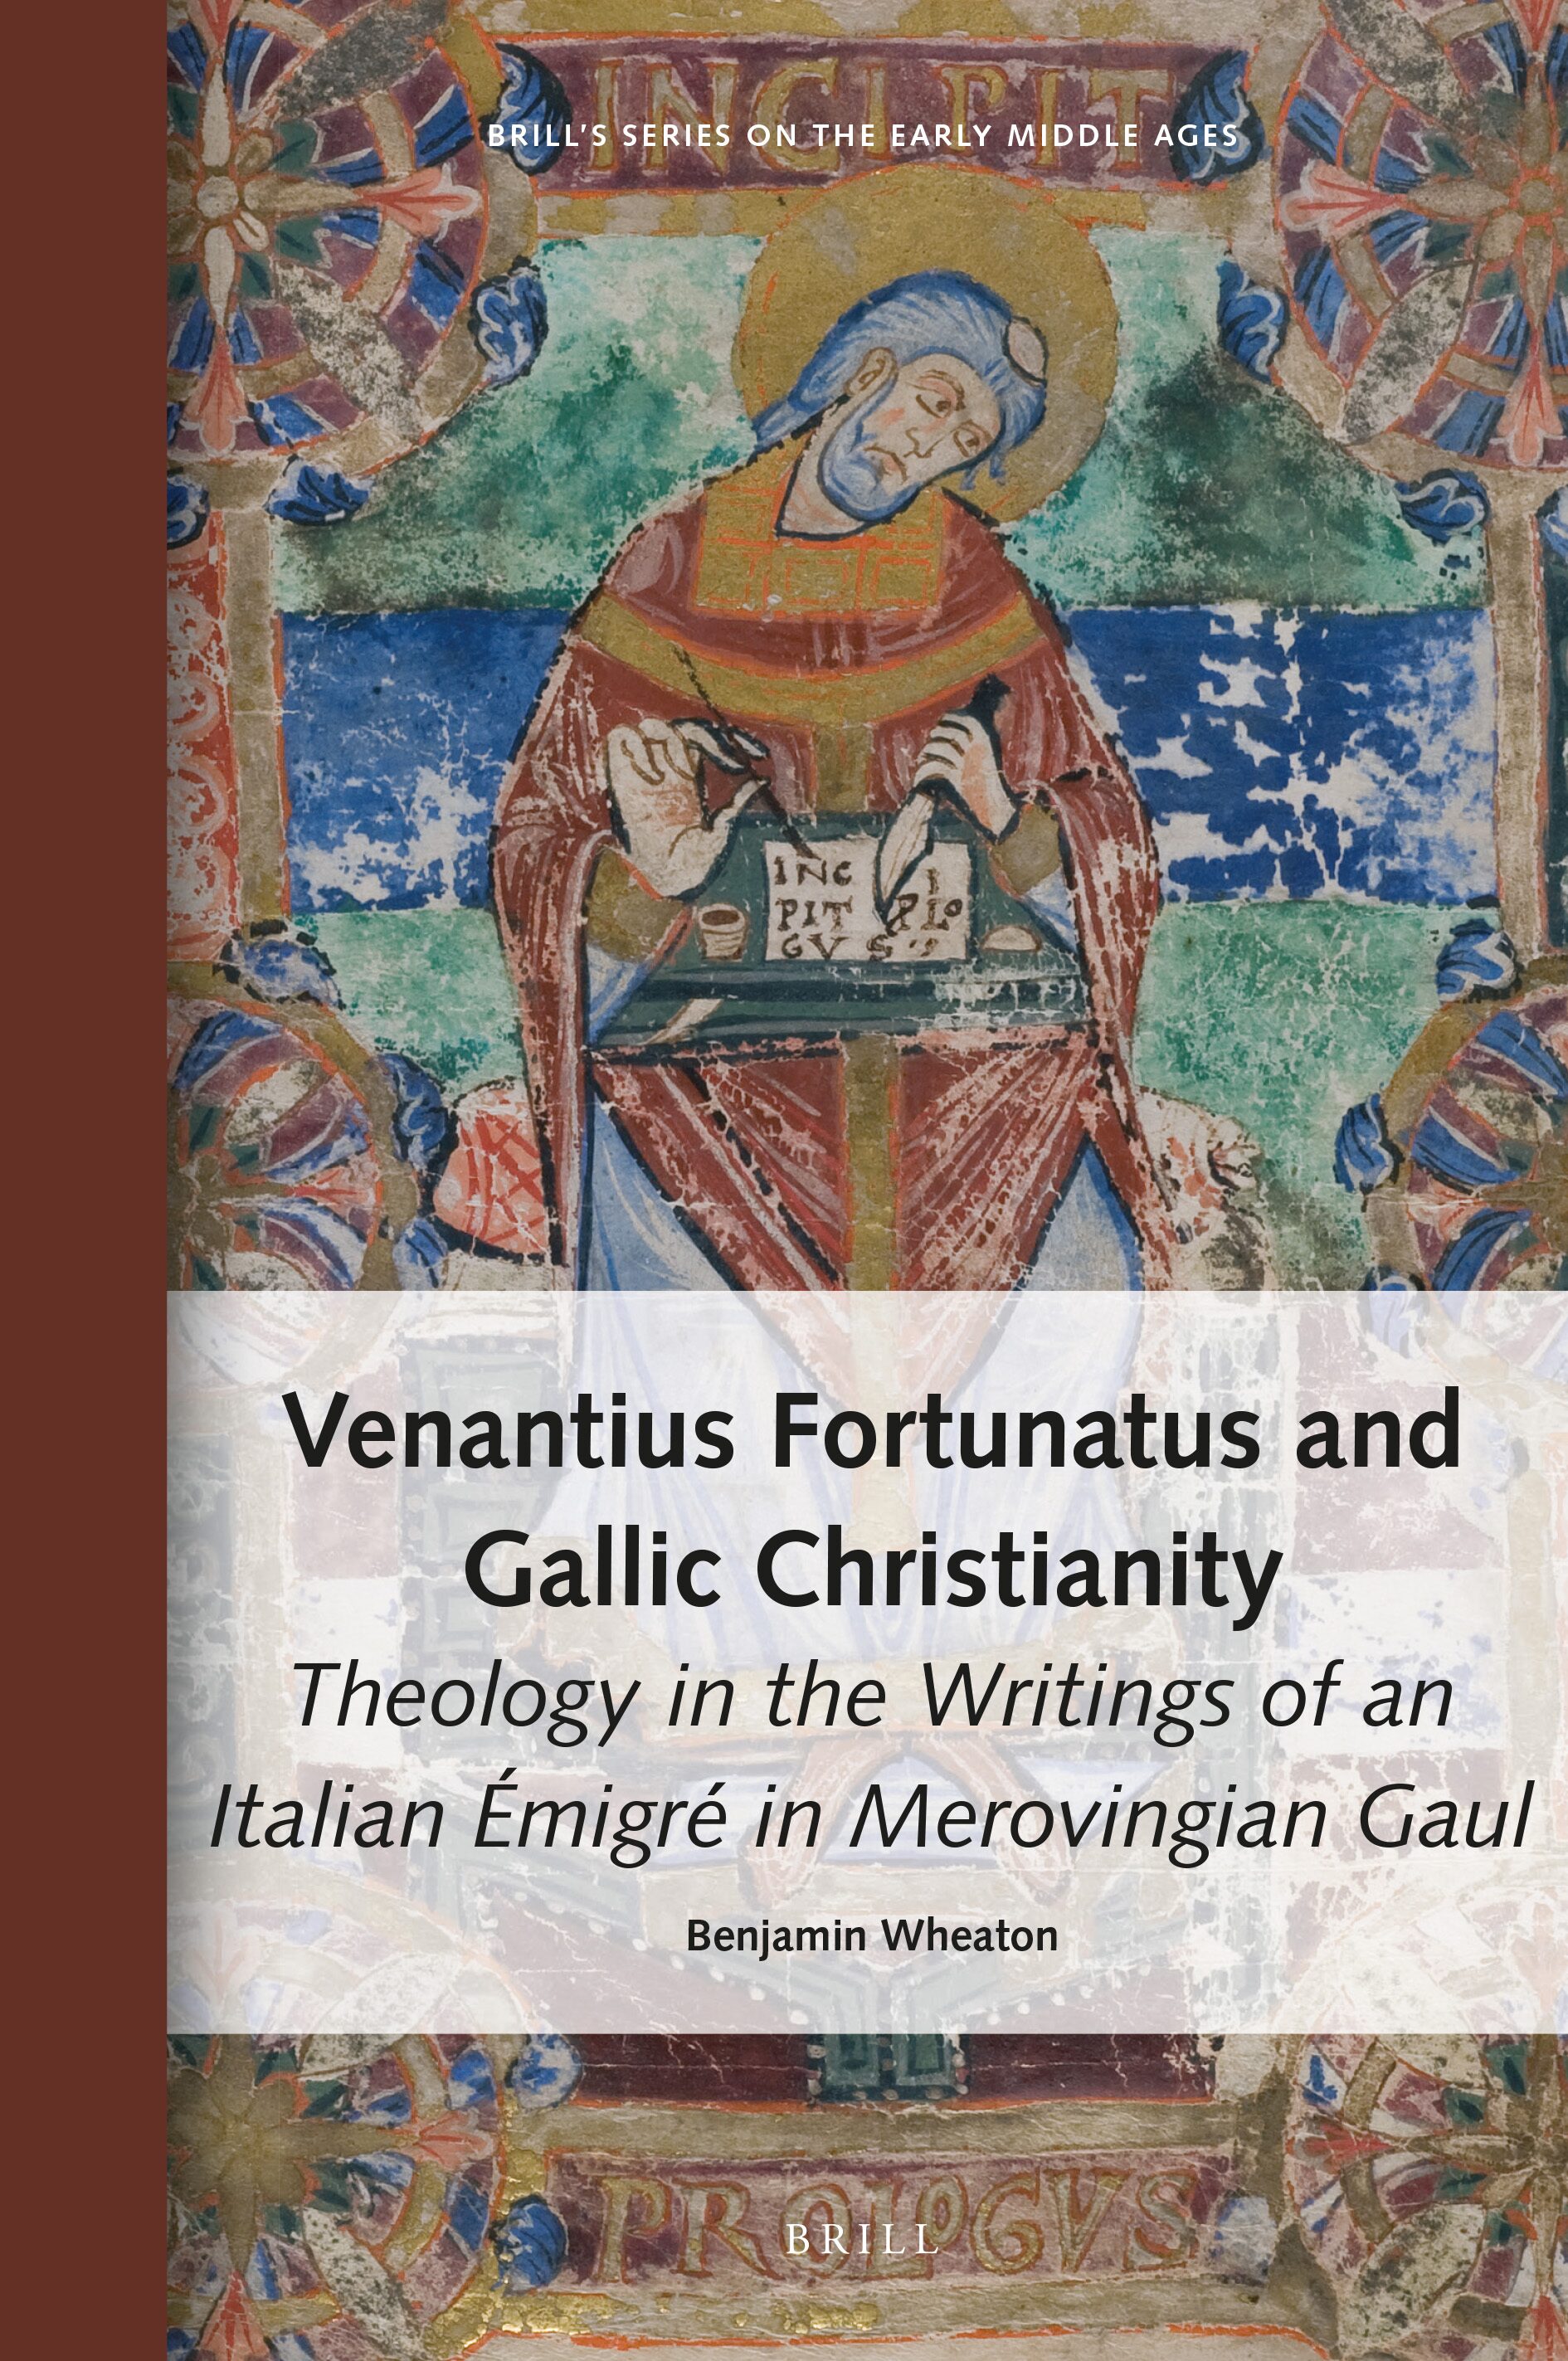 Venantius Fortunatus and Gallic Christianity Theology in the Writings of an Italian Émigré in Merovingian Gaul